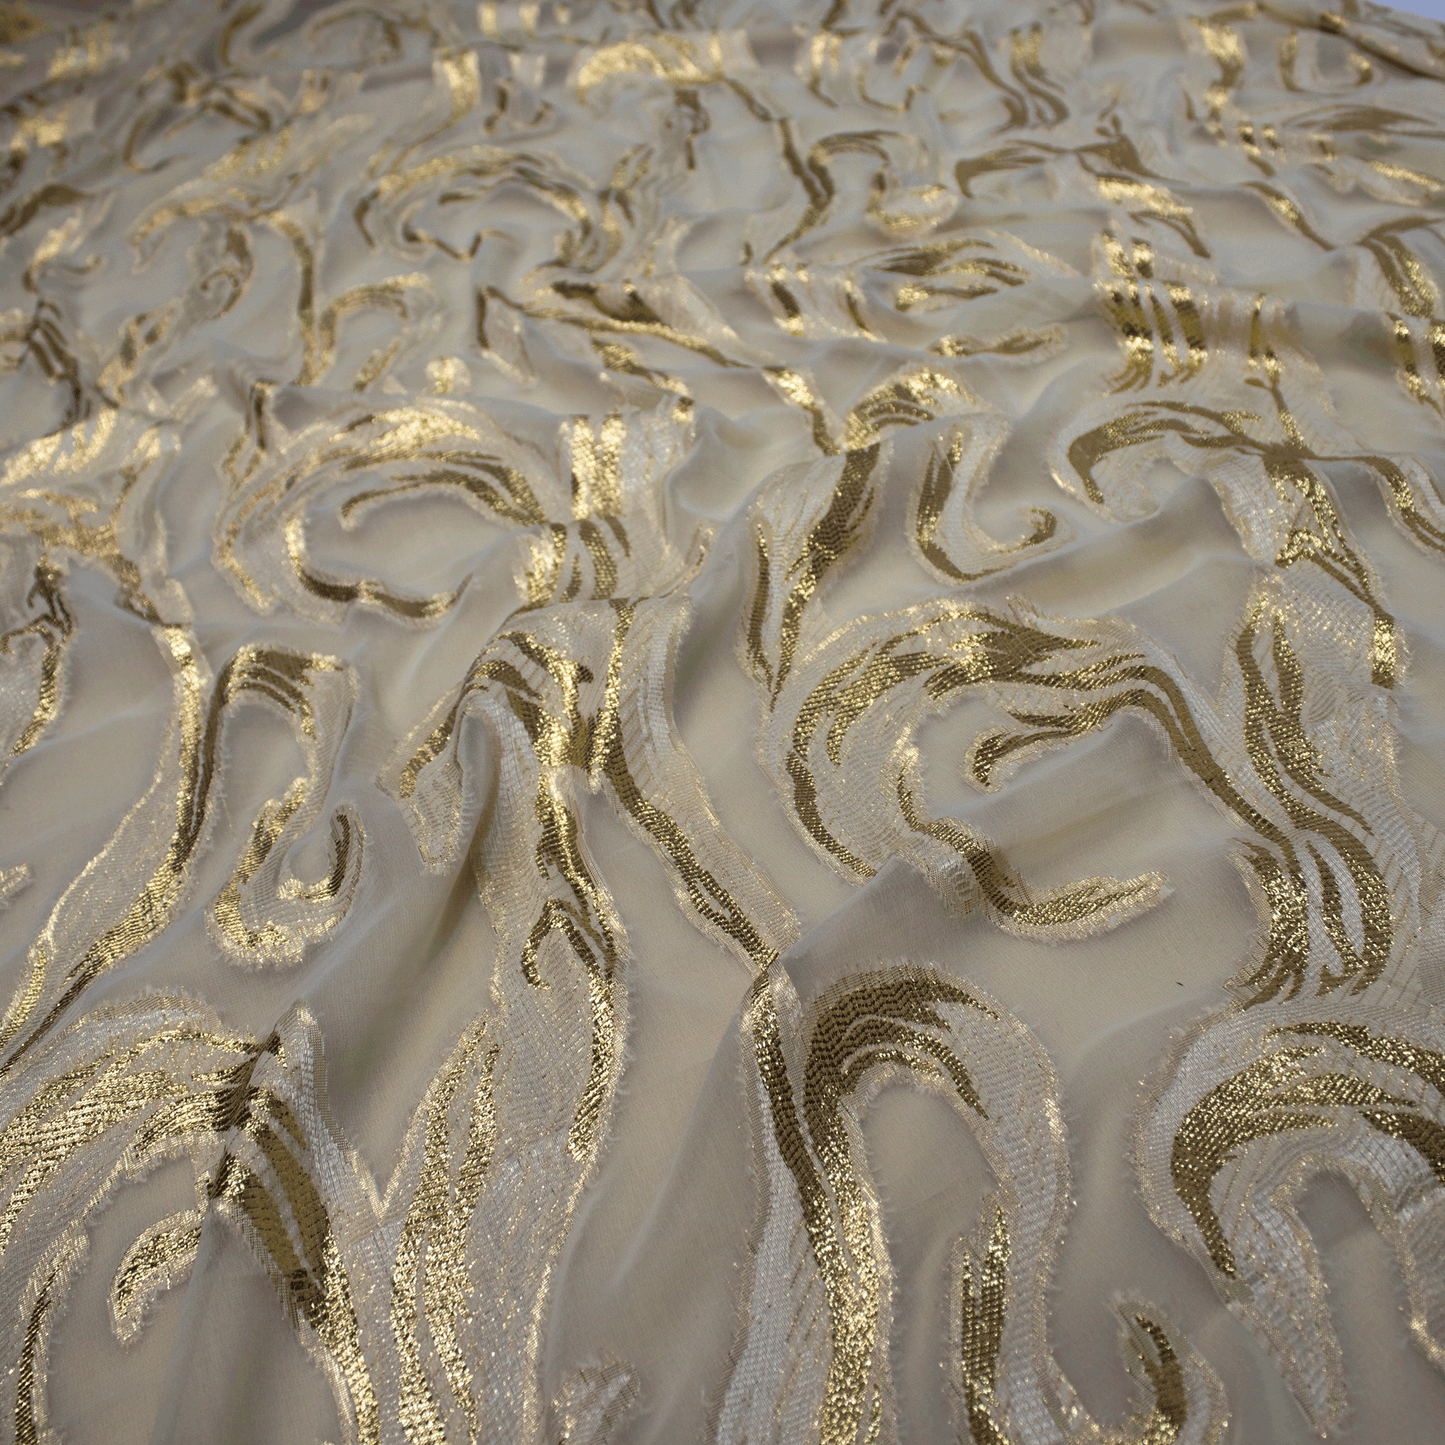 beautiful Ivory gold Dirac fransawi, made from fine fabric with intricate floral design patterns.